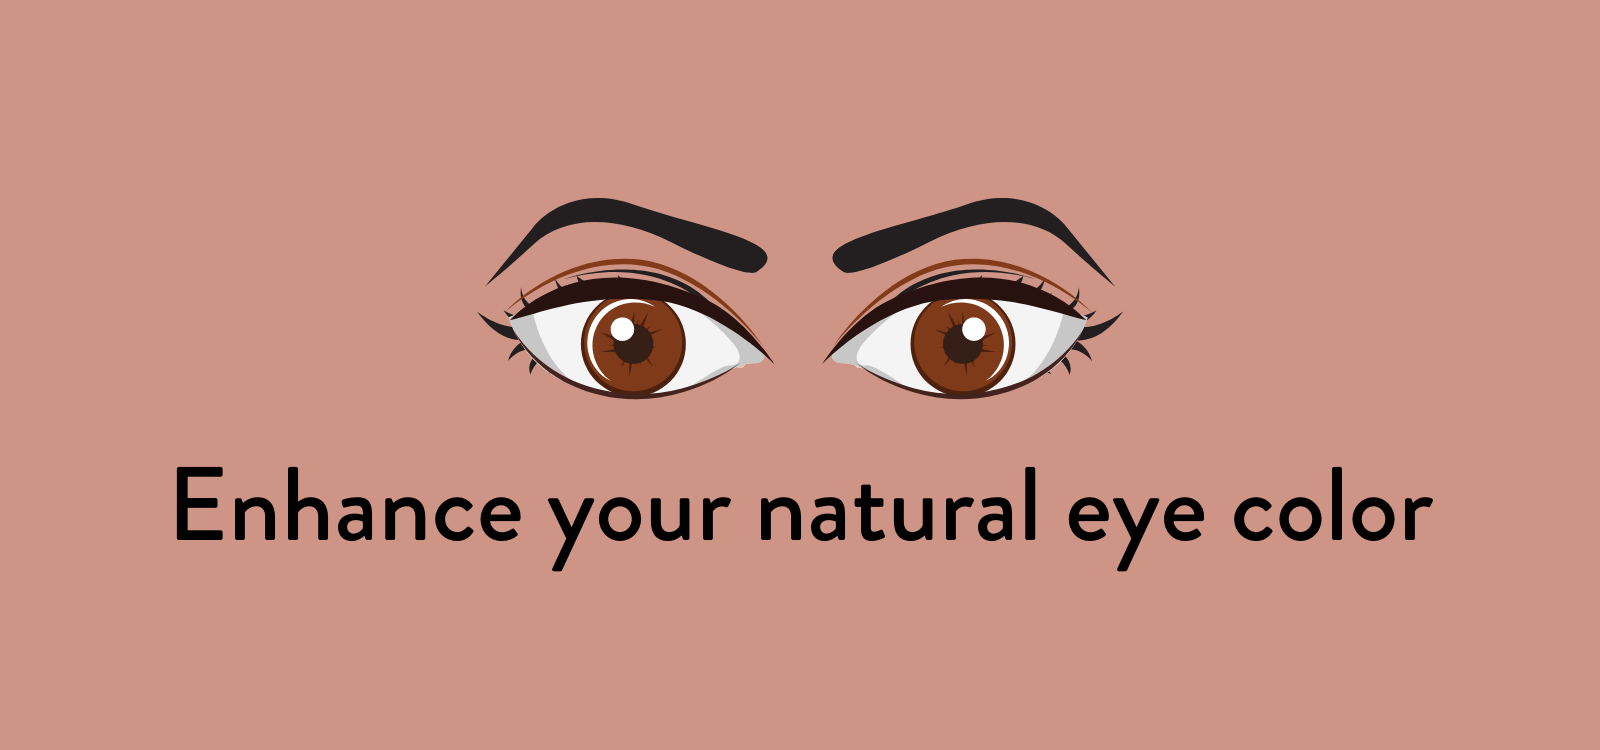 Enhance Your Natural Eye Color: Work With What You Got